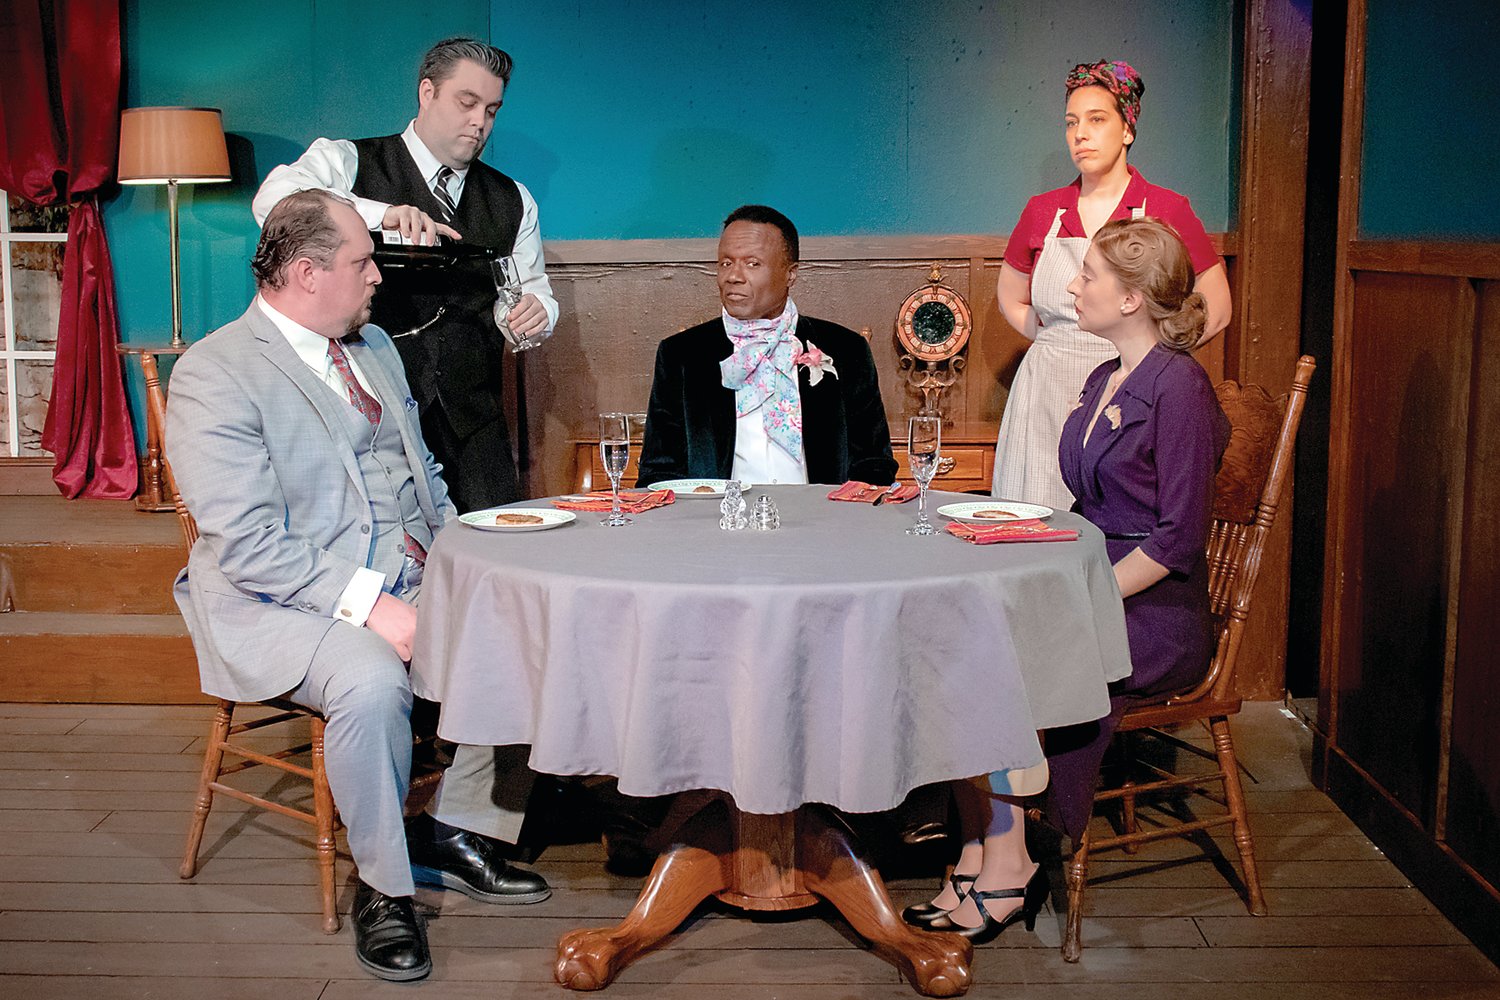 From left, Nicholas Pecht, D. Ryan Lafferty, G. Anthony Williams, Hayley Rubins-Topoleski, and Charlotte Kirkby star in “The Dover Road,” ActorsNet’s latest production.